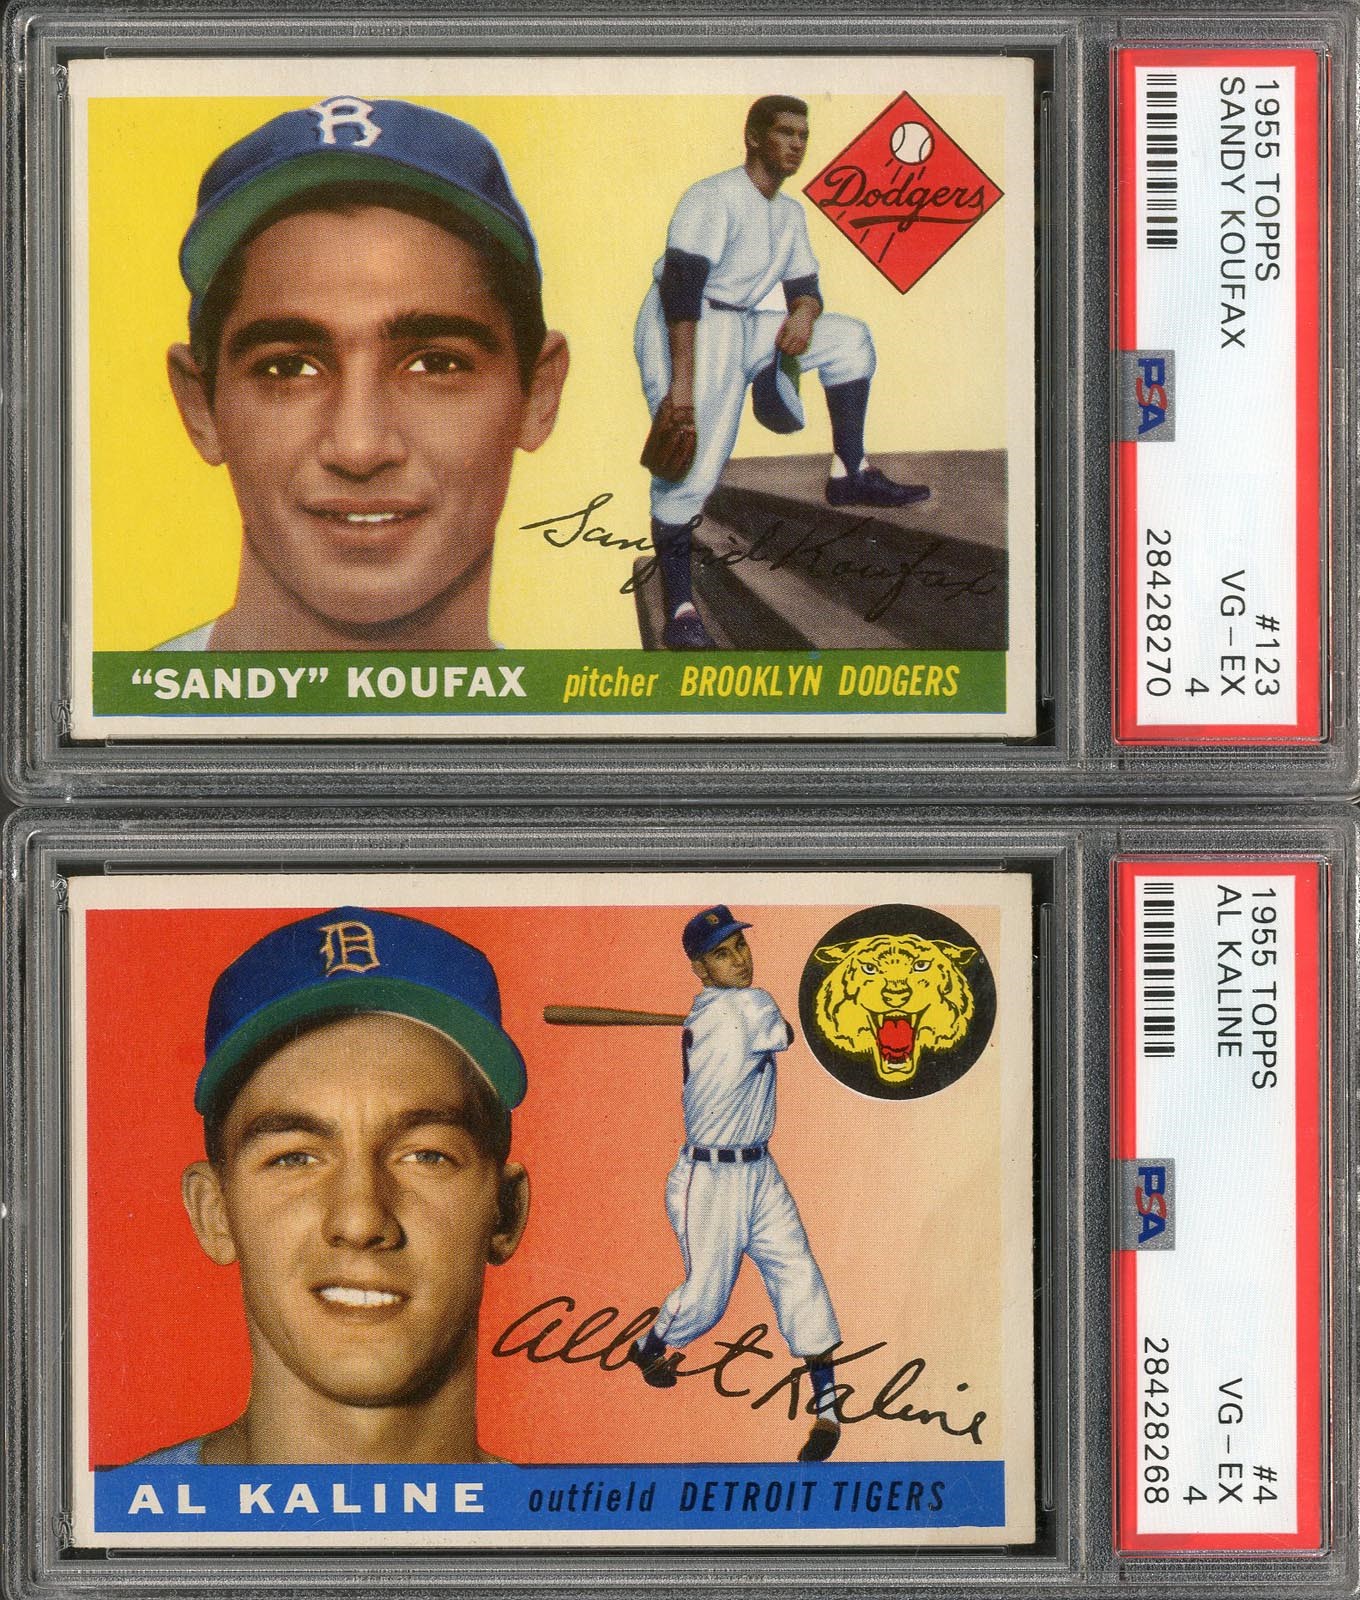 - 1955 Topps PSA Graded Pair with Koufax and Kaline